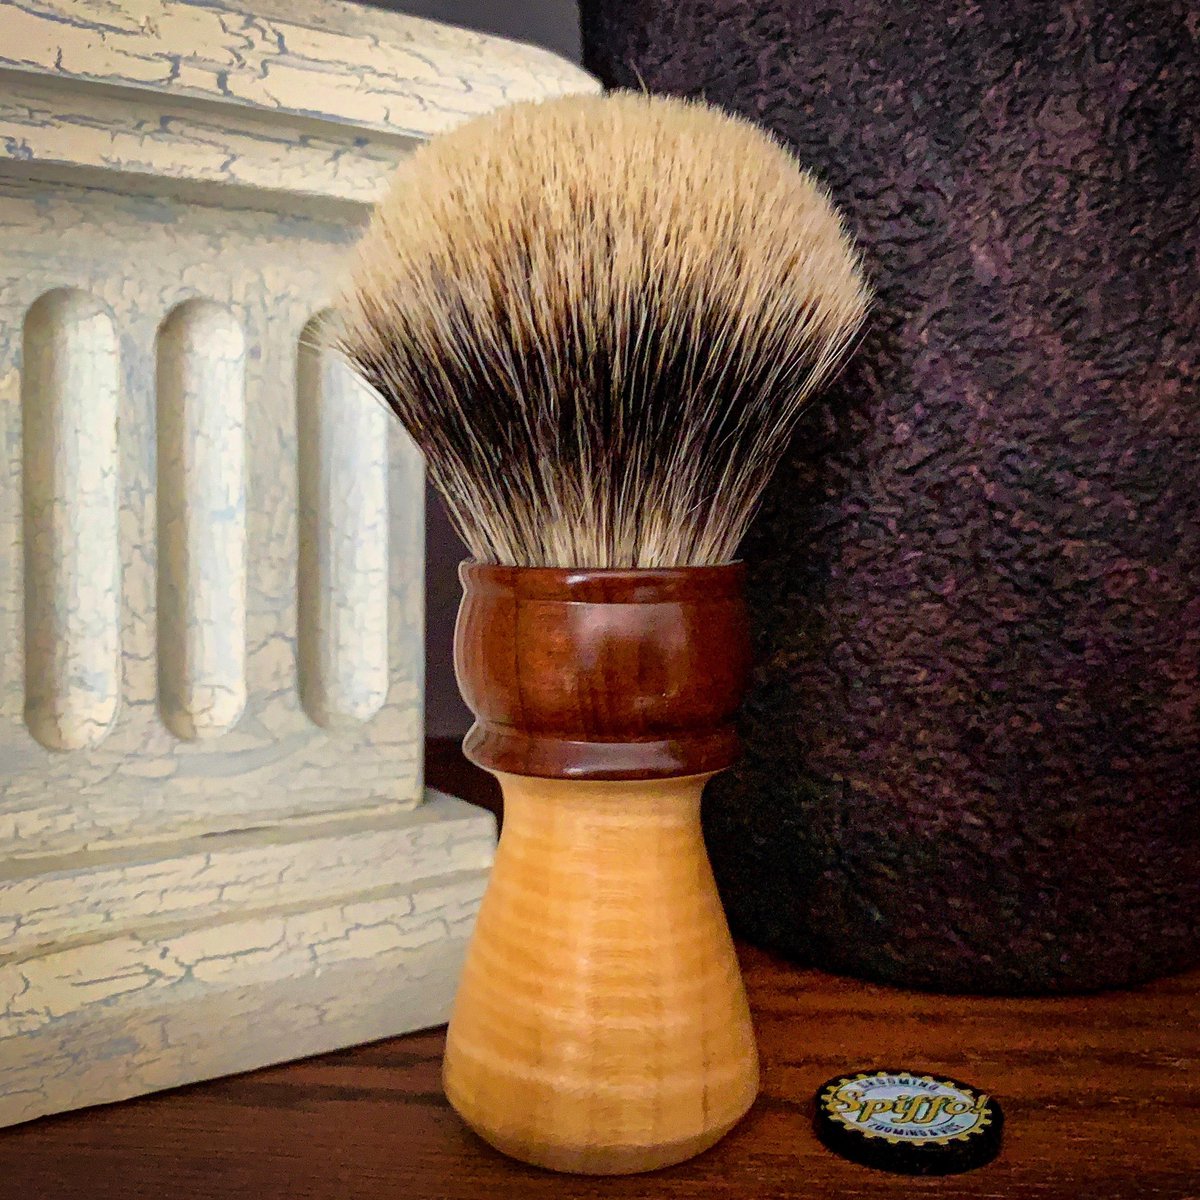 The combination of a curly Maple and roasted Birch wooden handle and a 26mm Two-Band badger knot makes Koan a one of a kind! #shavingbrush #shavebrush #shavingbrushes #spiffo #spiffoman #shaveoftheday #shaving #wetshaving #wetshavers #madeinhalifax #halifax